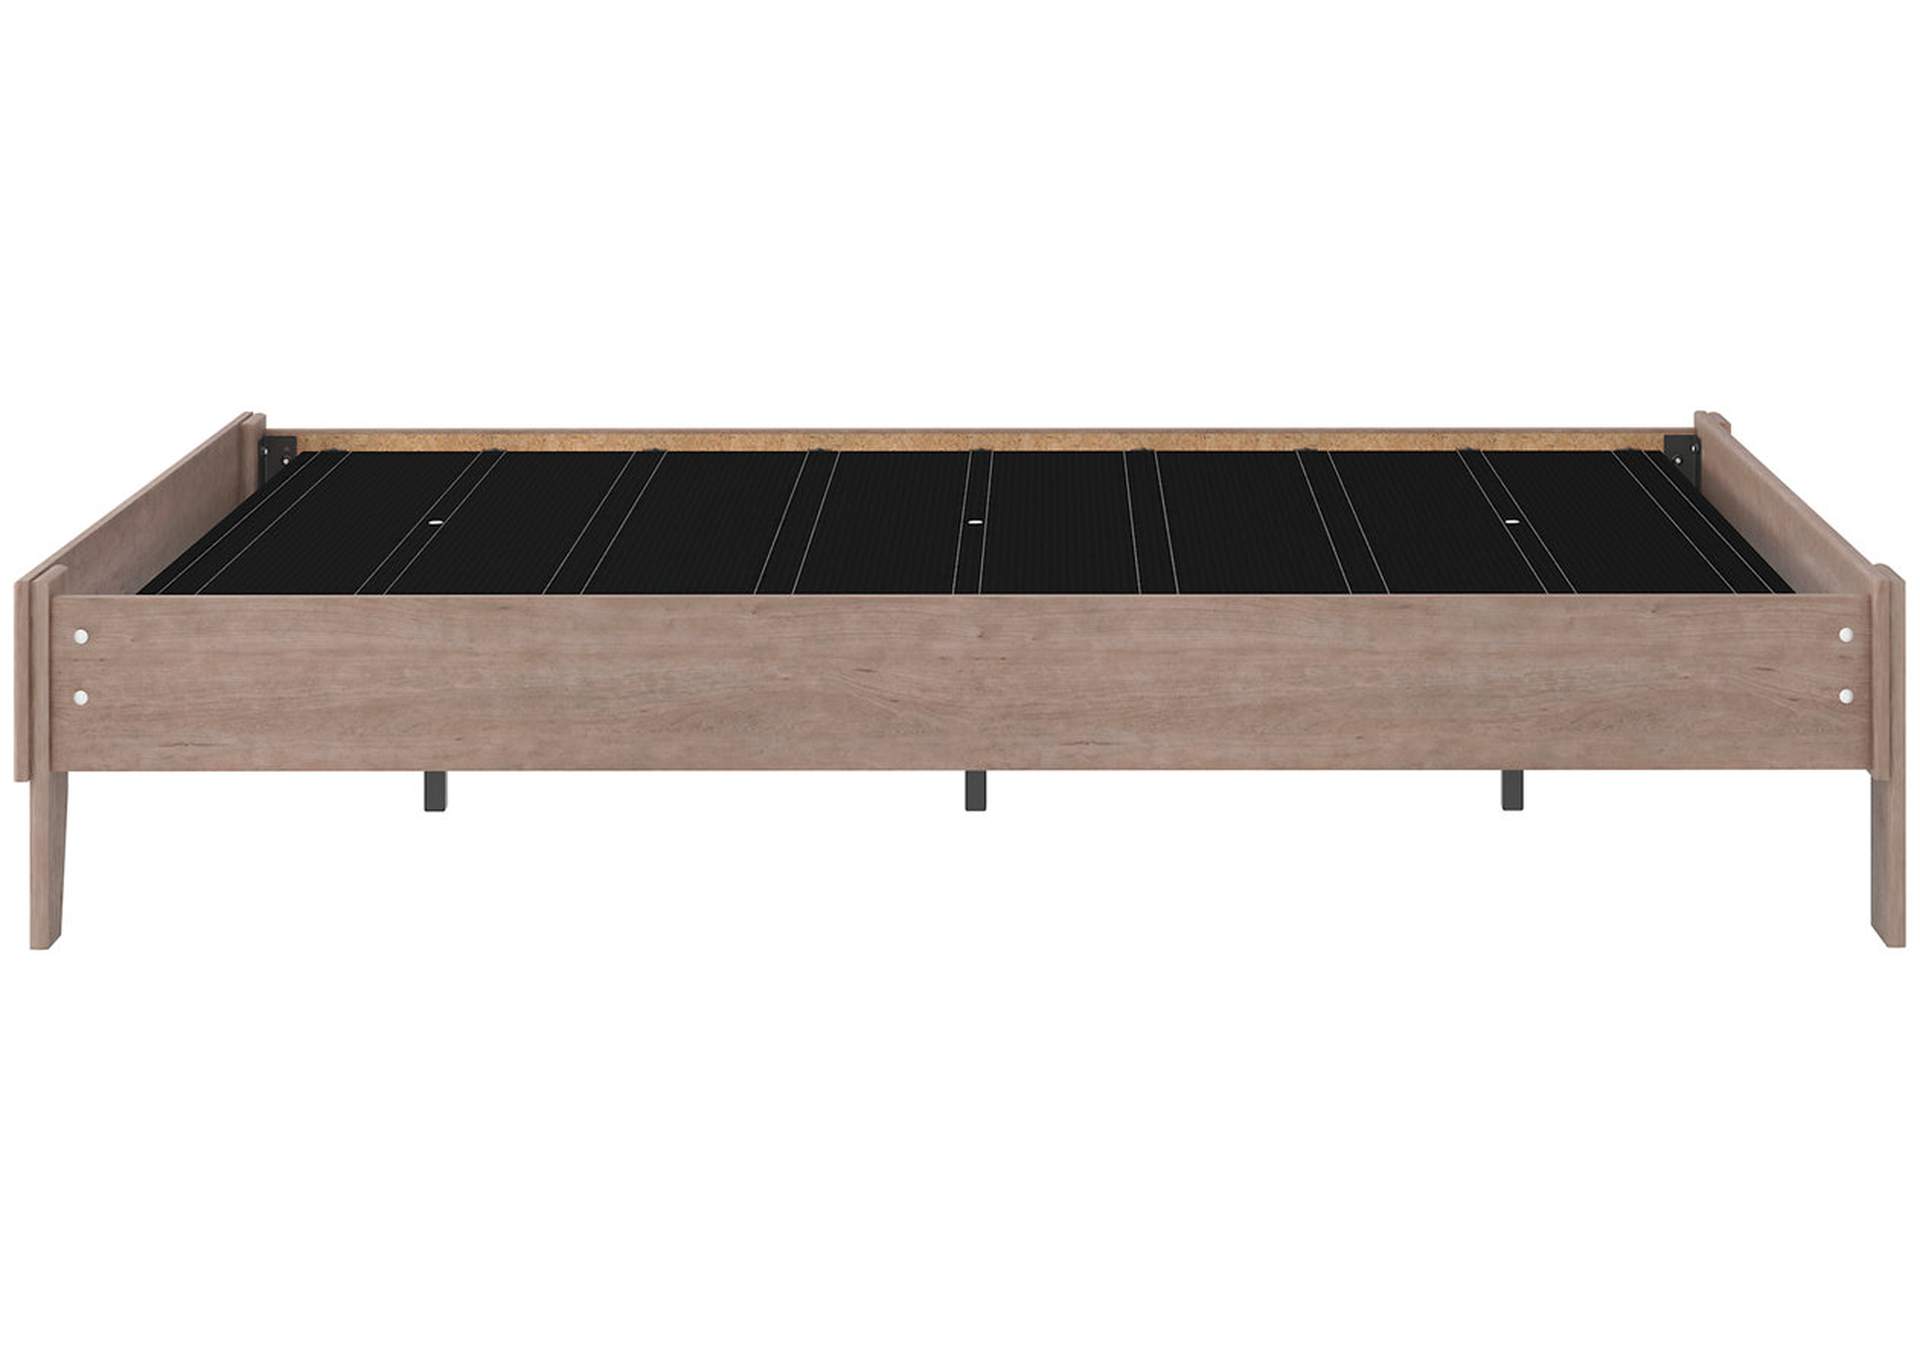 Flannia Full Platform Bed,Direct To Consumer Express